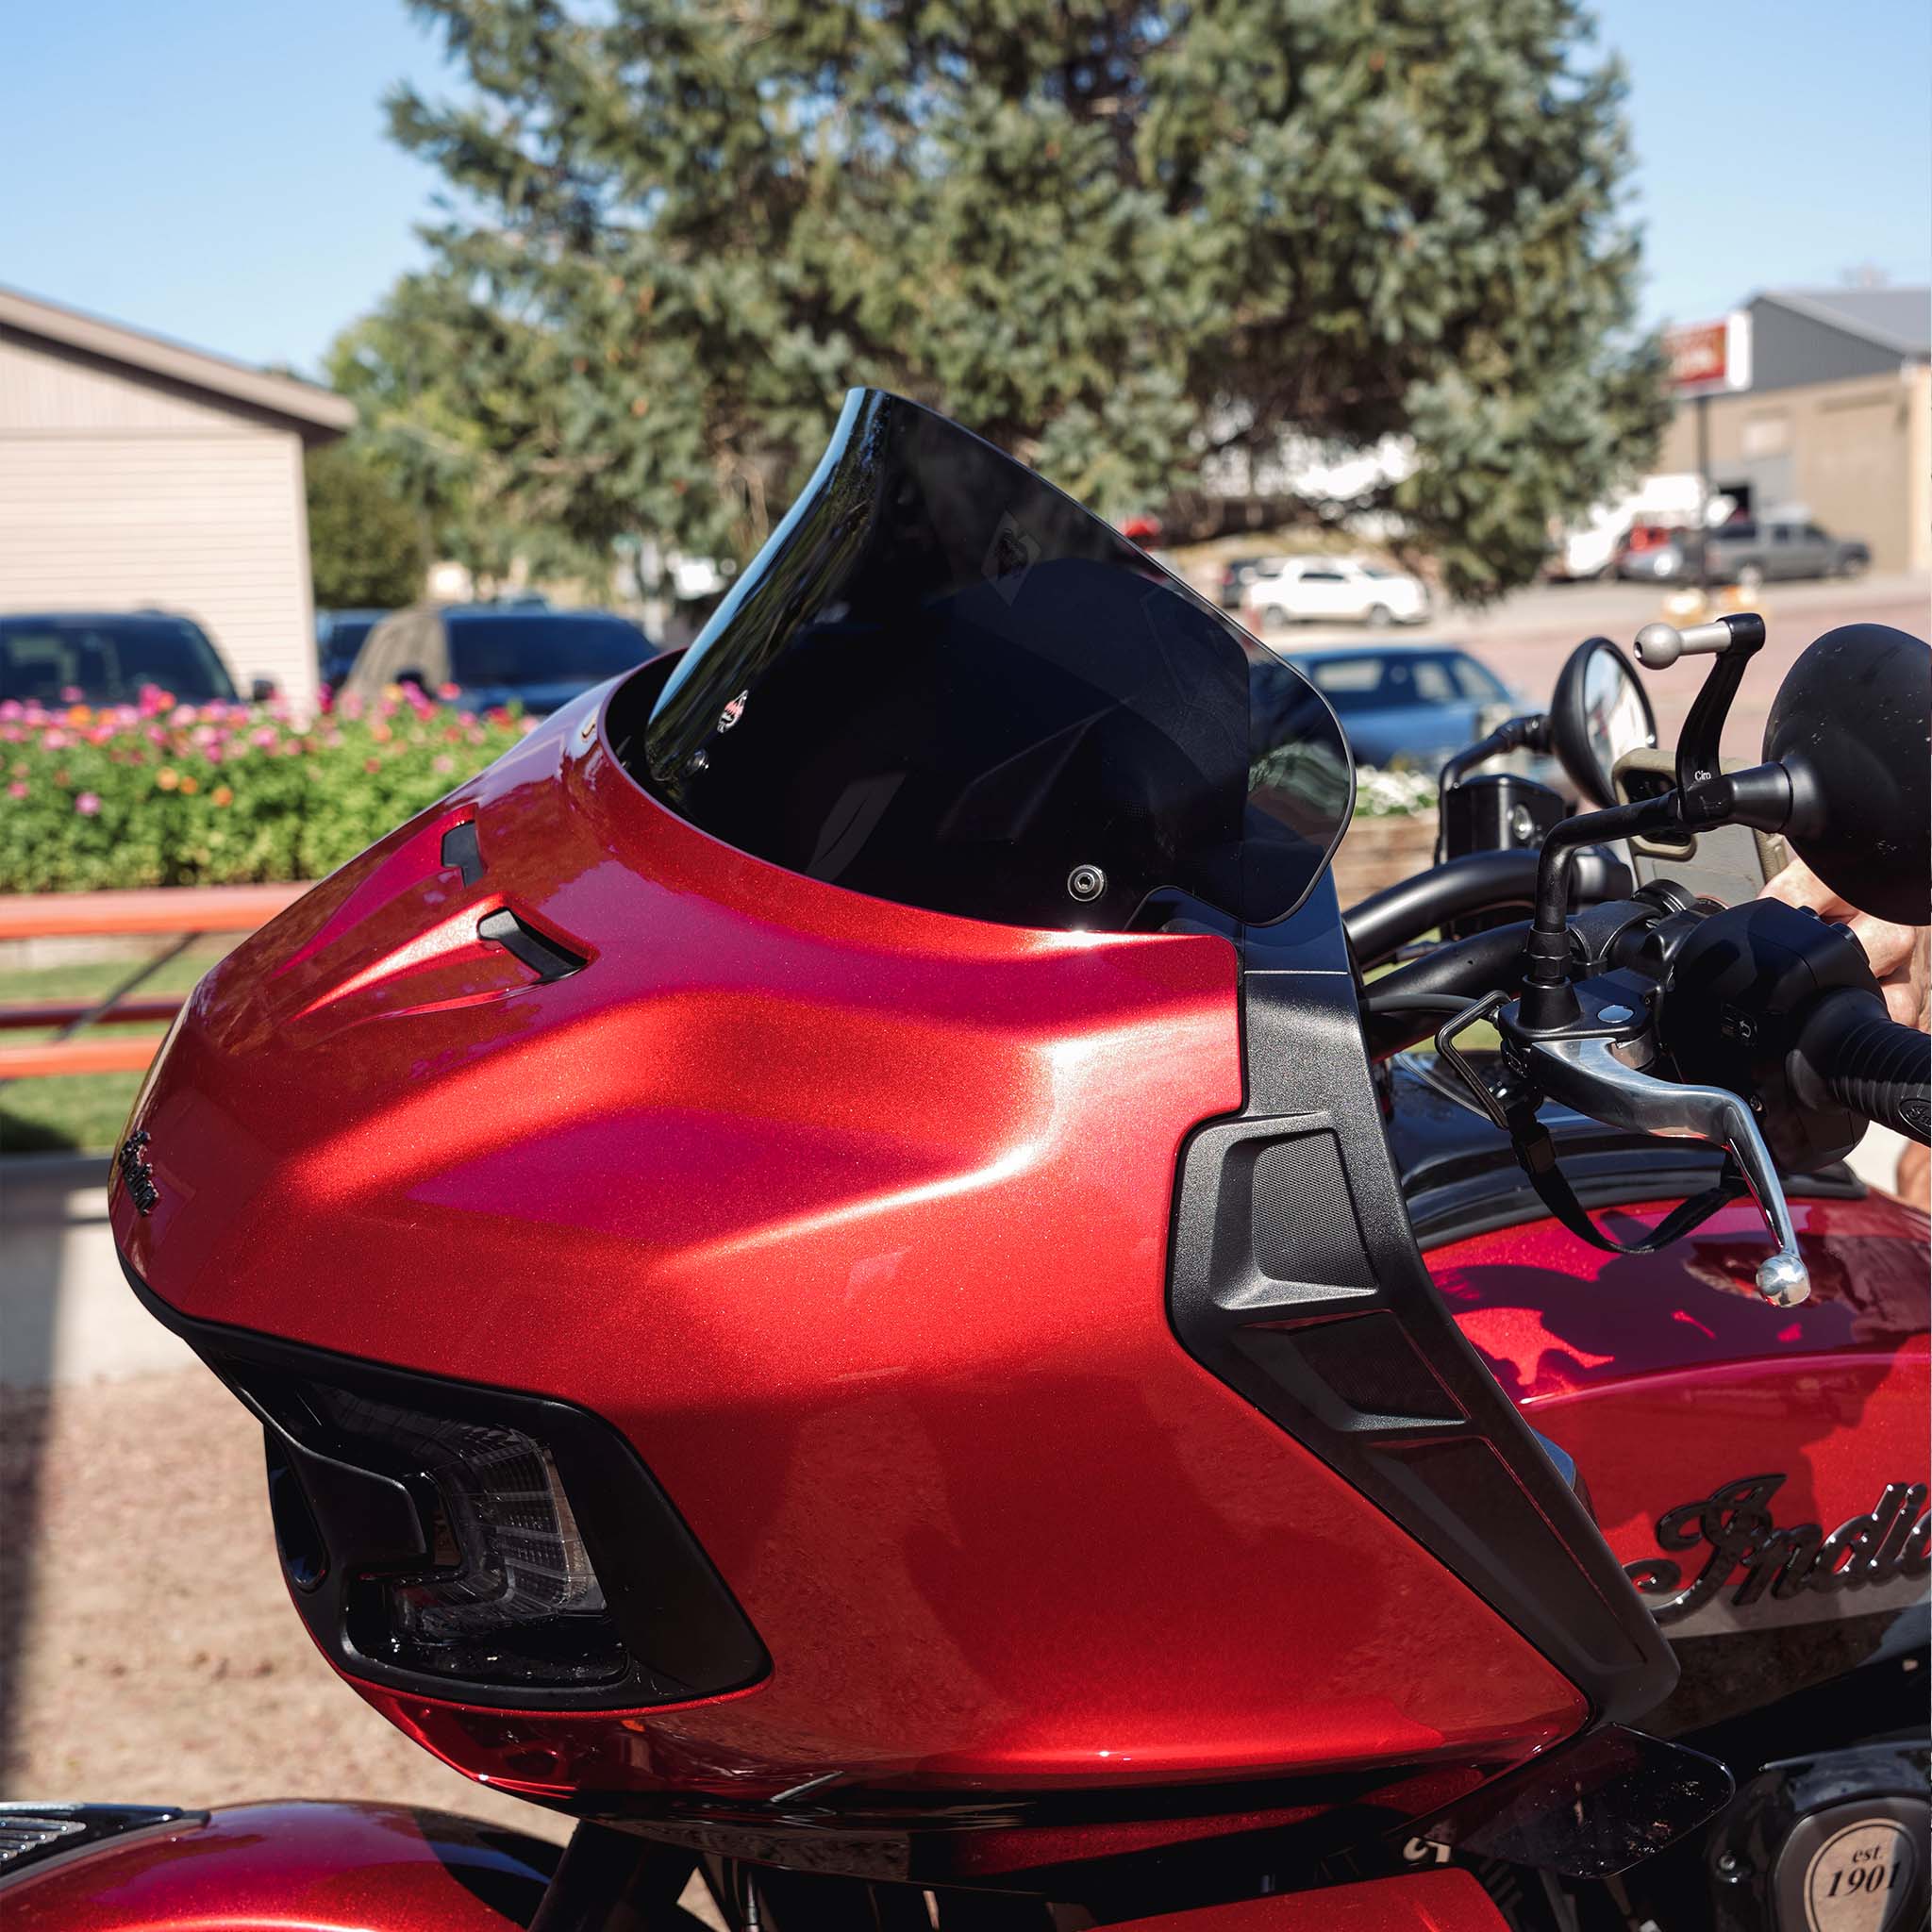 8" Dark Smoke Flare™ Windshield For 2020-2023 Indian® Challenger and Pursuit motorcycle models shown in down position(8" Dark Smoke - Down)